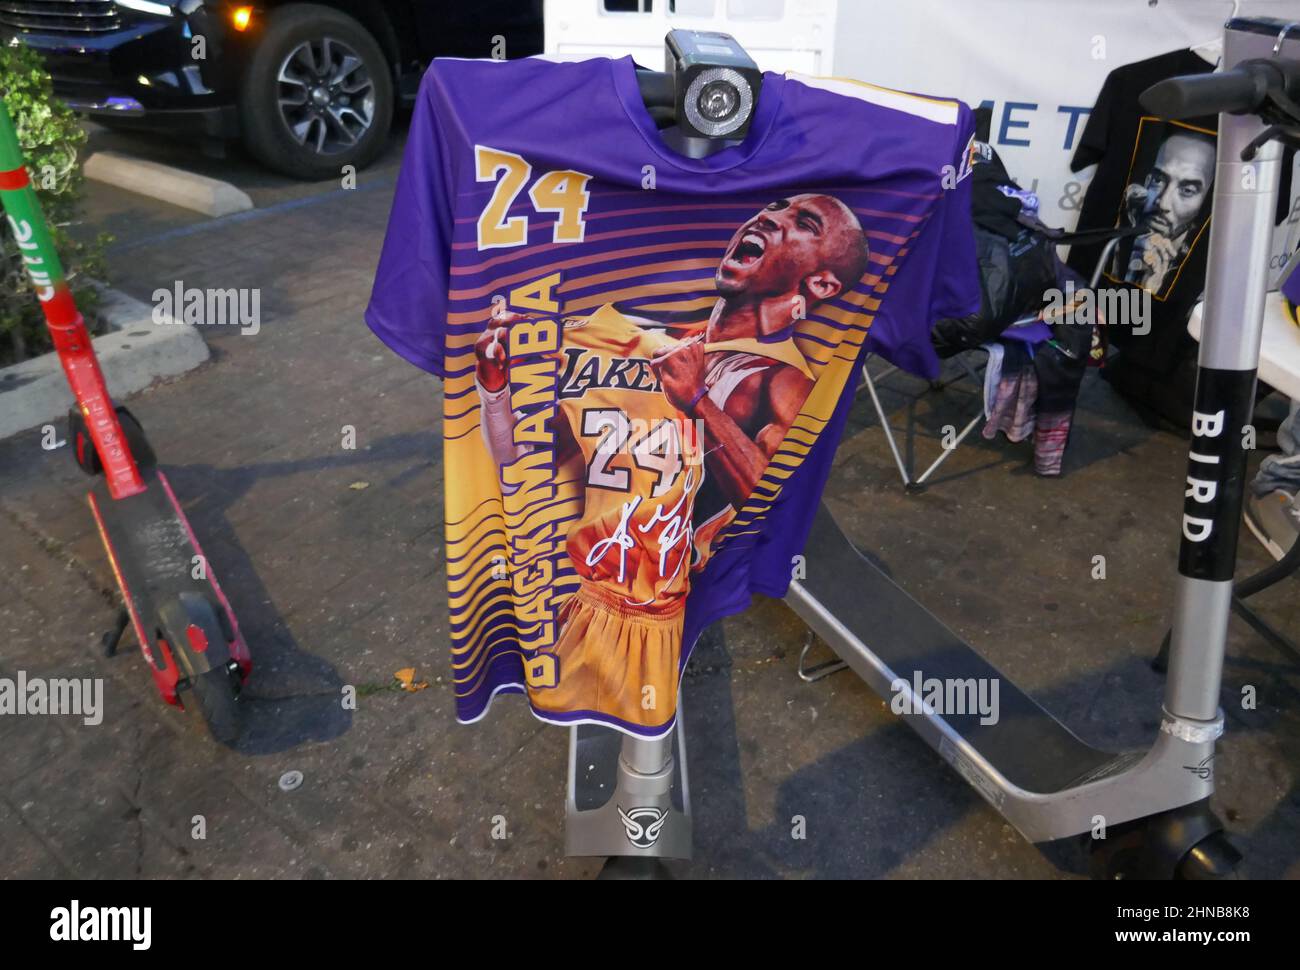 Los Angeles, California, USA 12th February 2022 Kobe Bryant T shirt for sale on Sidewalk at Crypto.com Arena on February 12, 2022 in Los Angeles, California, USA. Photo by Barry King/Alamy Stock Photo Stock Photo